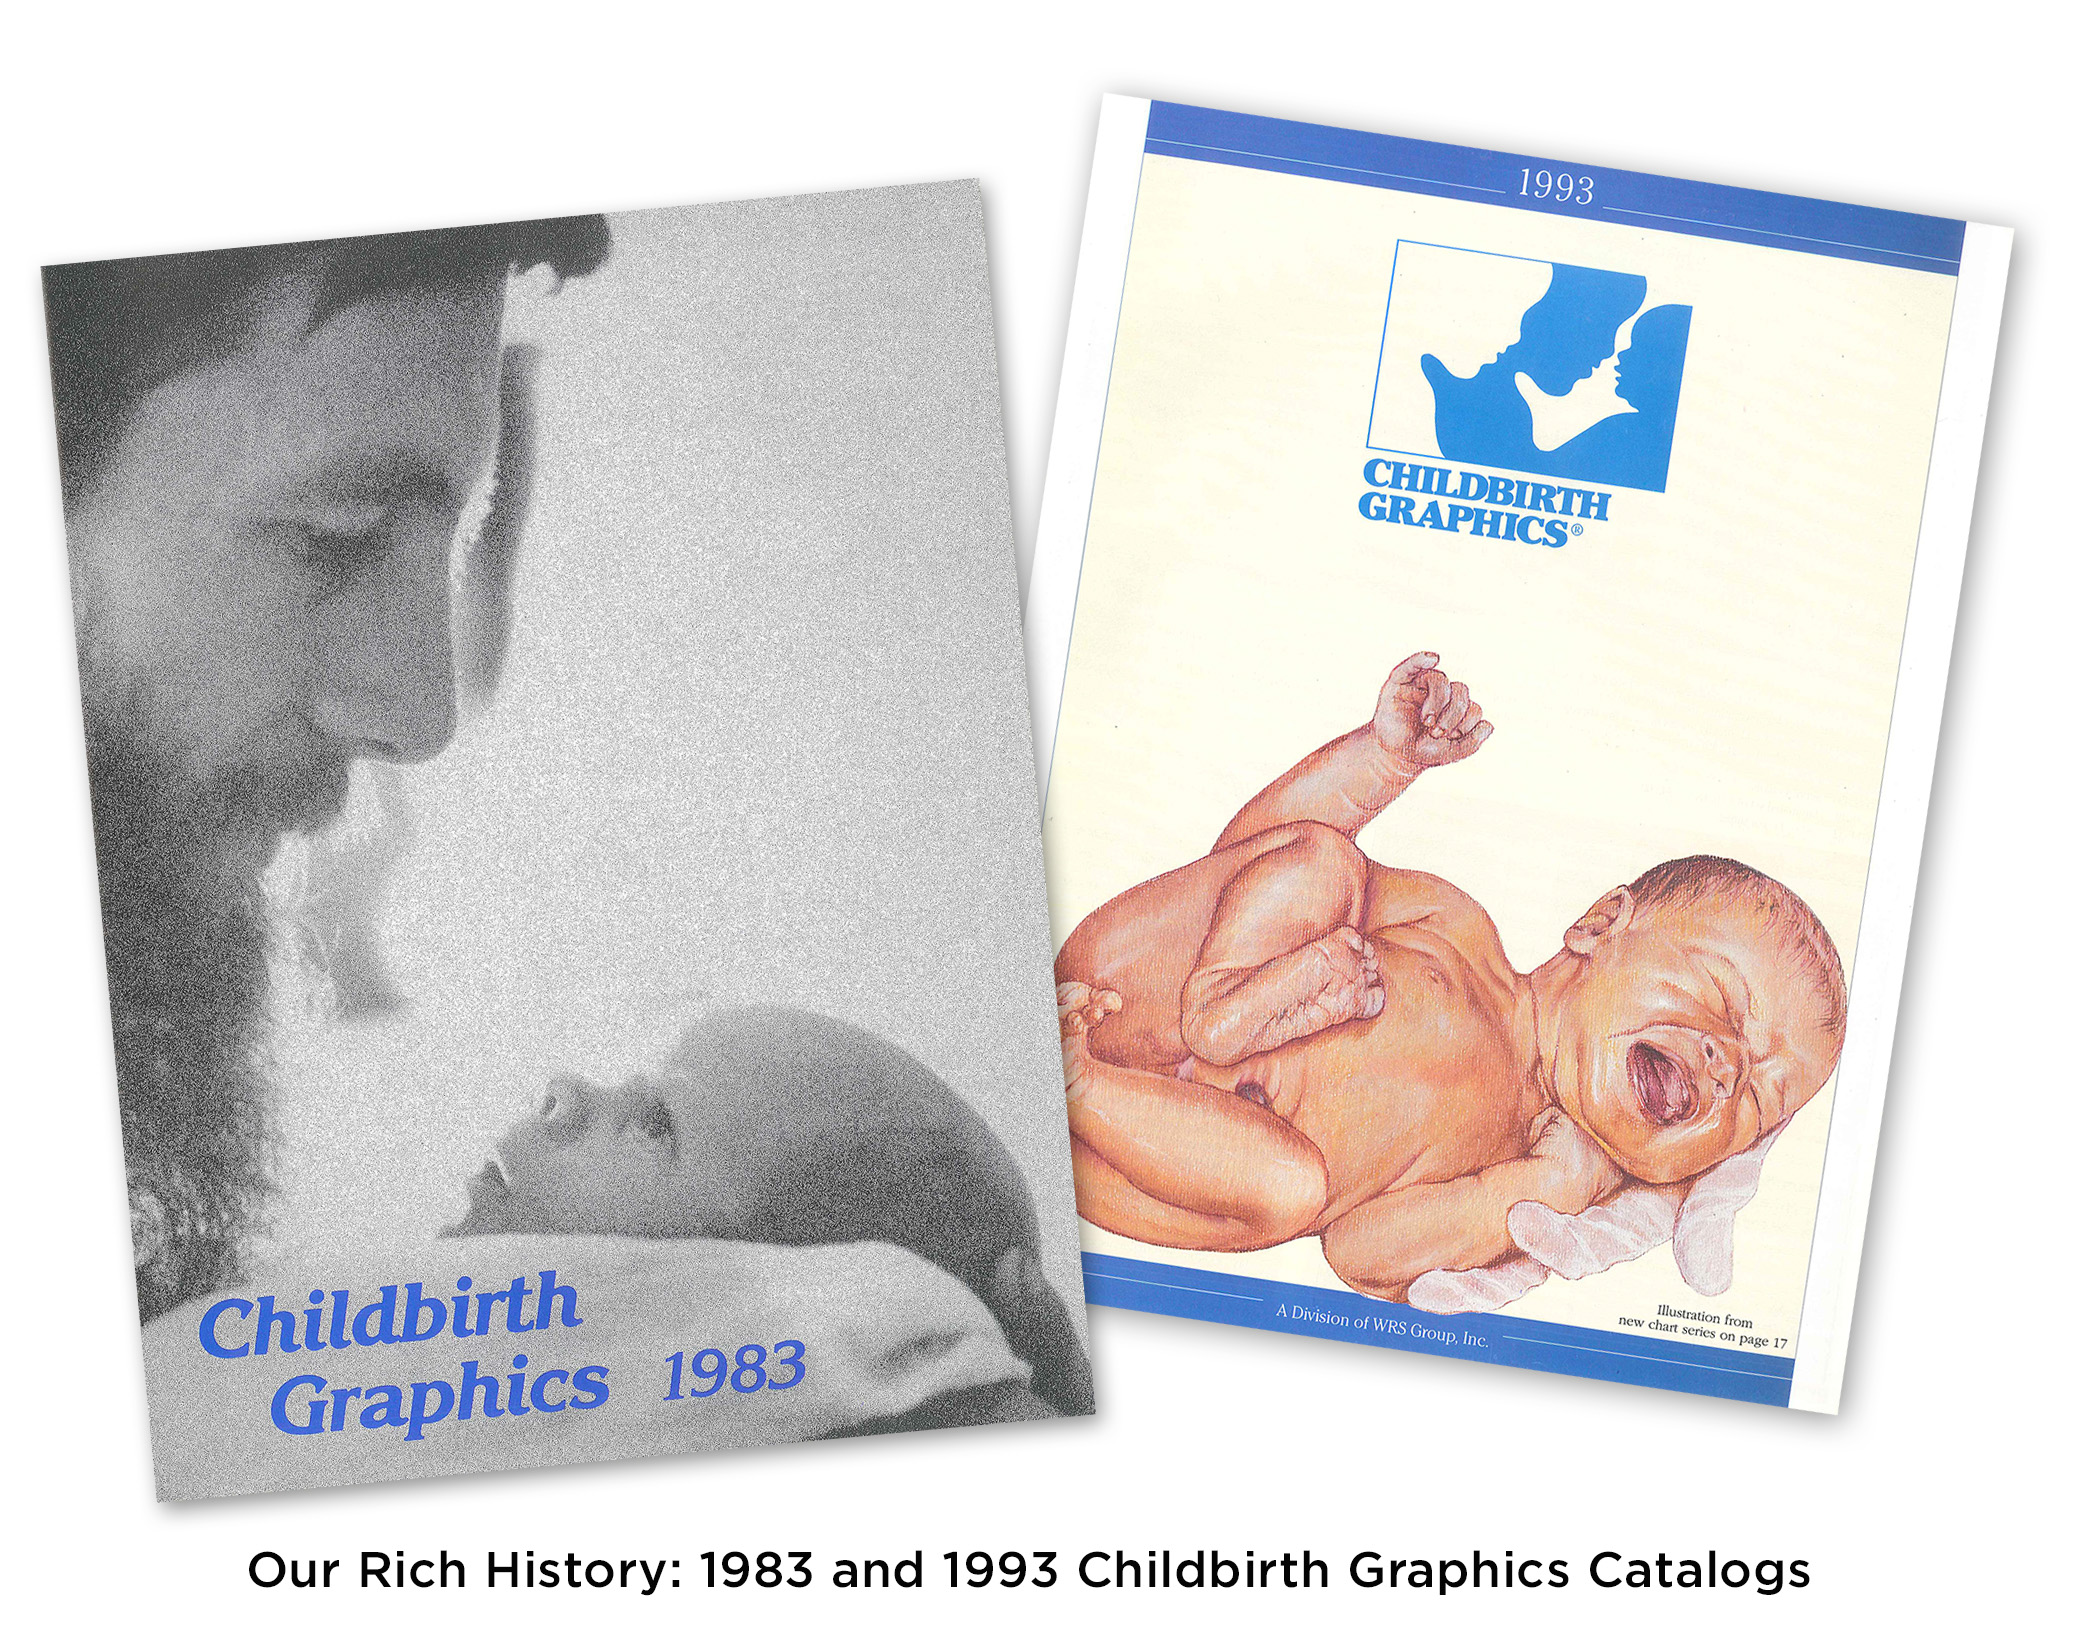 Childbirth Graphics catalogs from 1983 and 1993